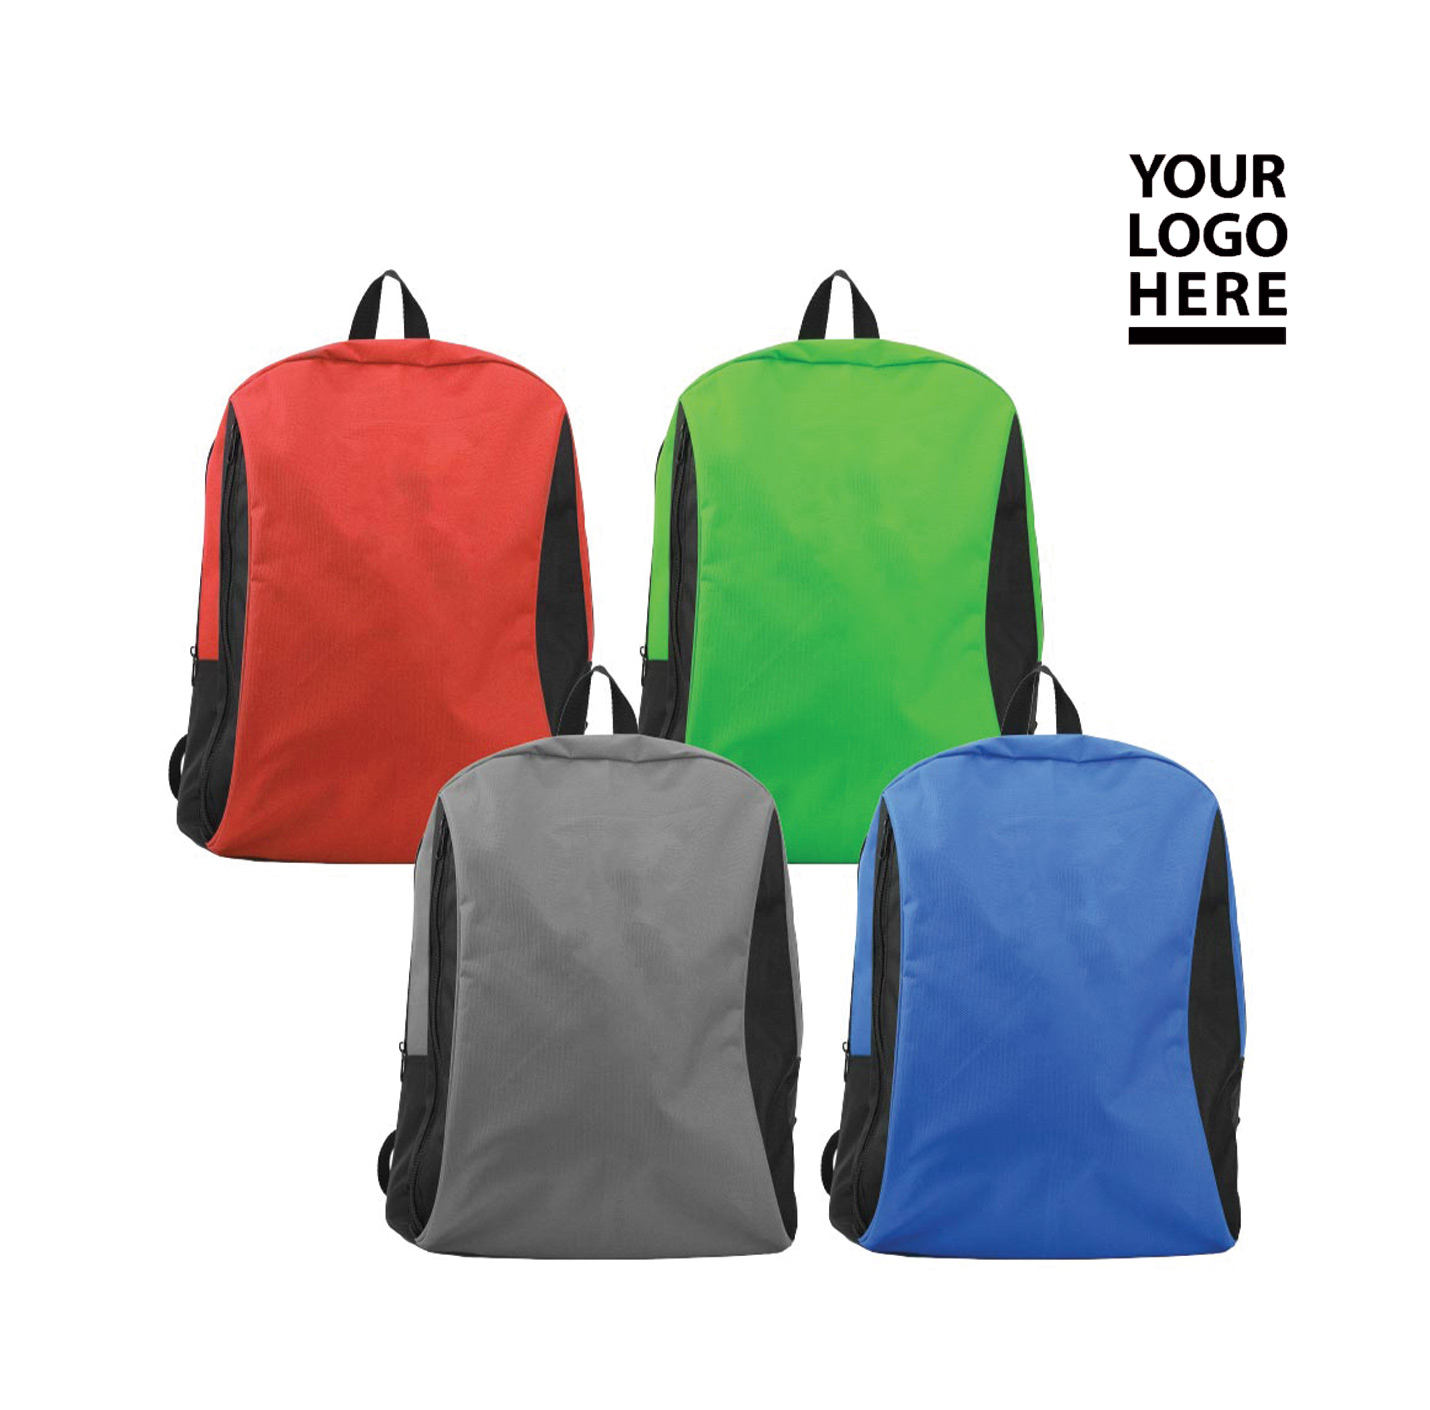 Two-toned Backpacks 600D Polyester Material SB-12